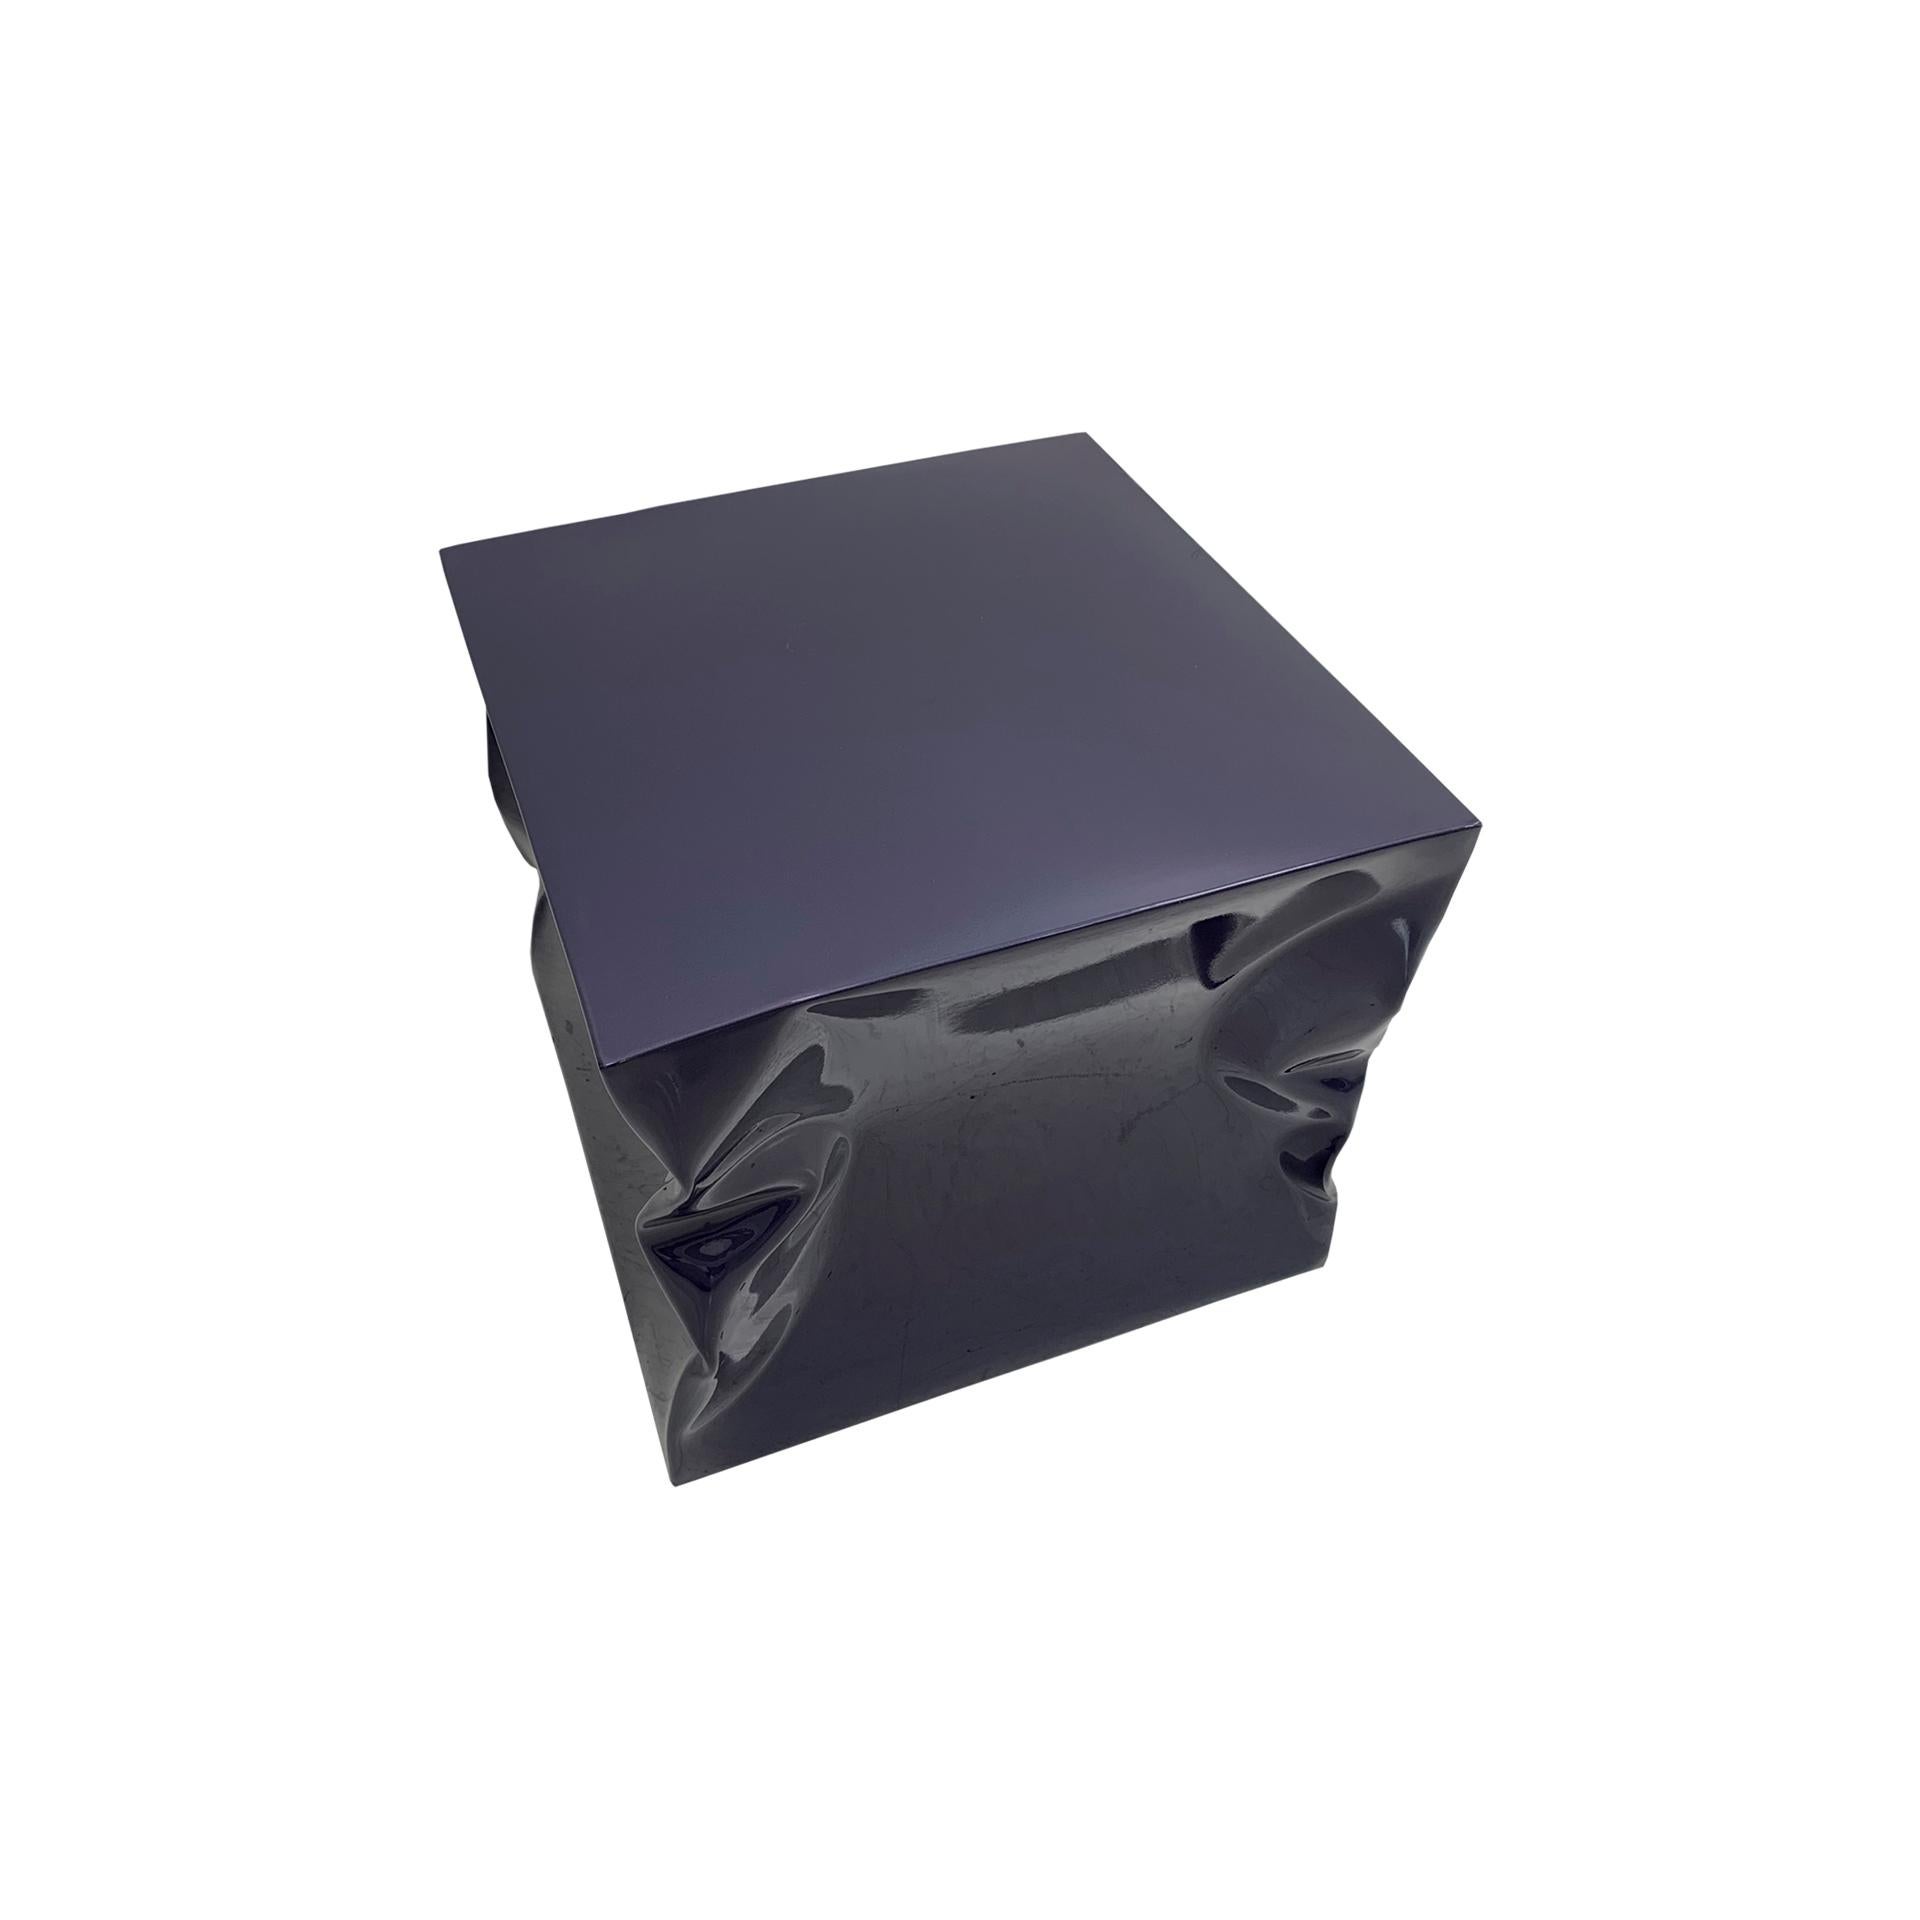 Made by a metal craftsman and oven lacquered in indigo. It can be used as a stool or a side table.